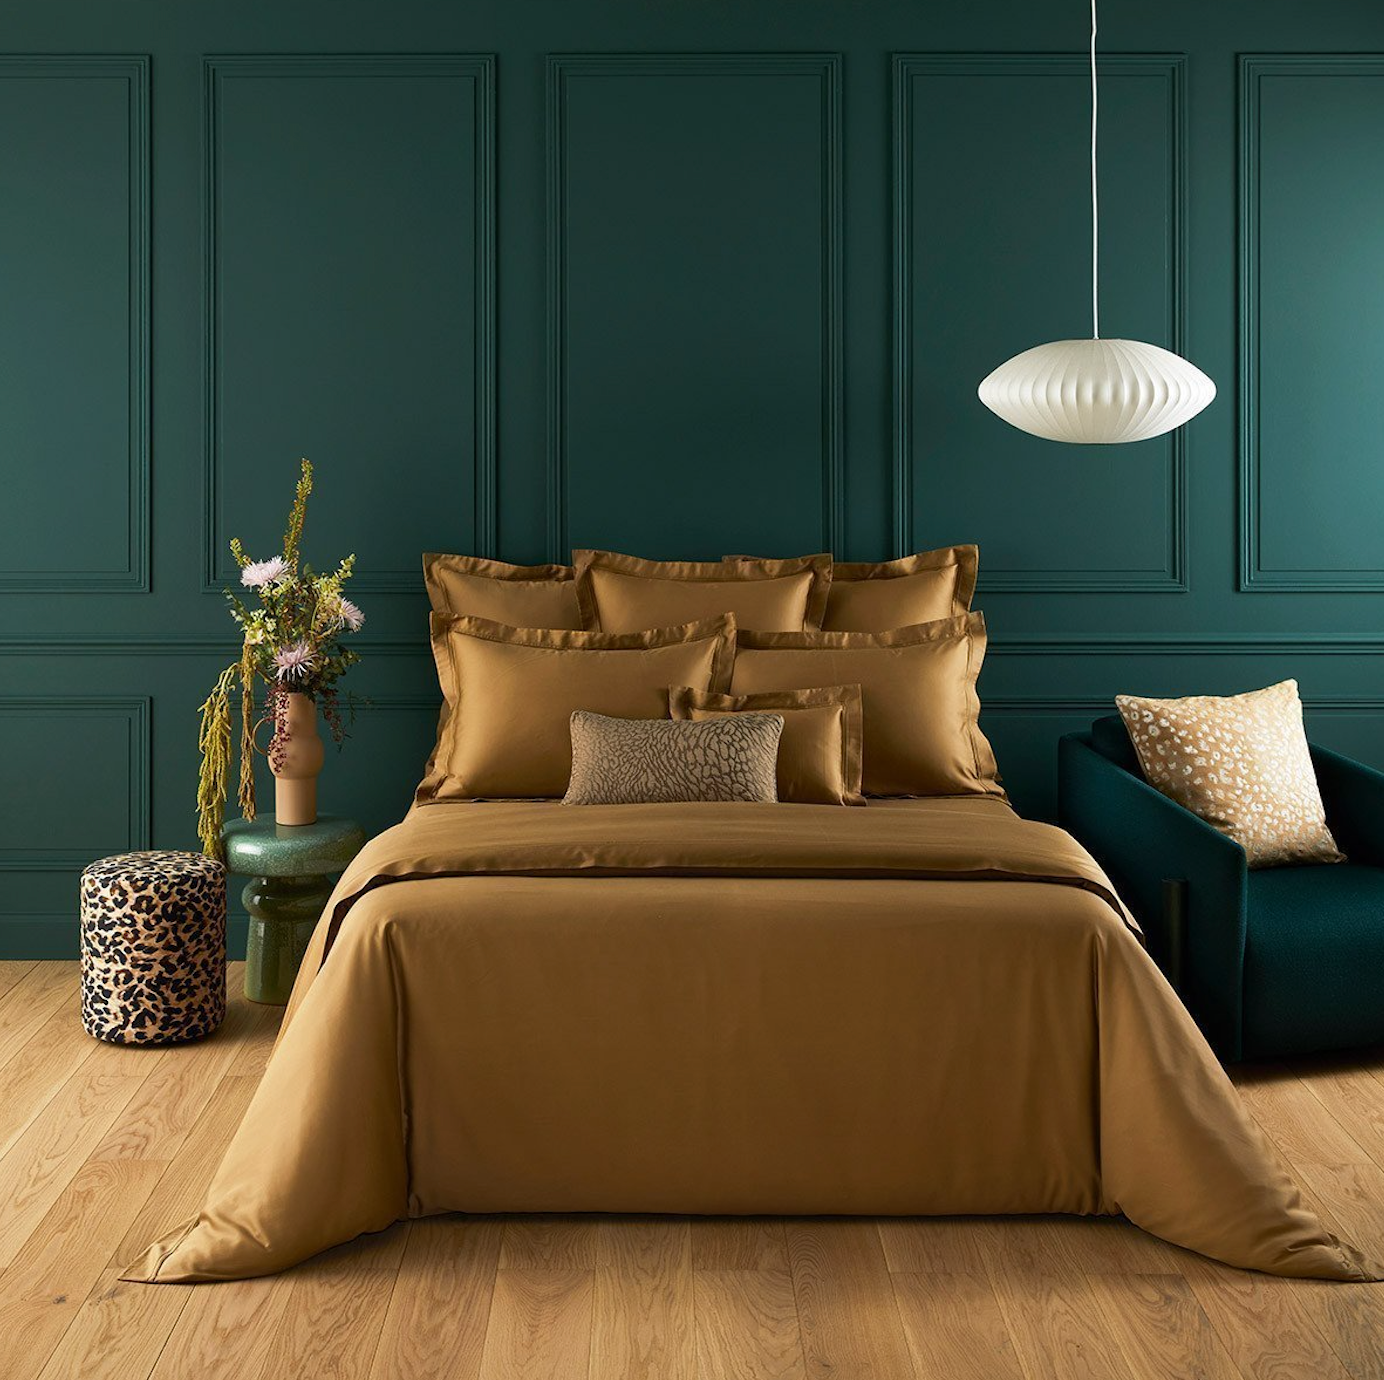 Triomphe bed collection by Yves Delorme